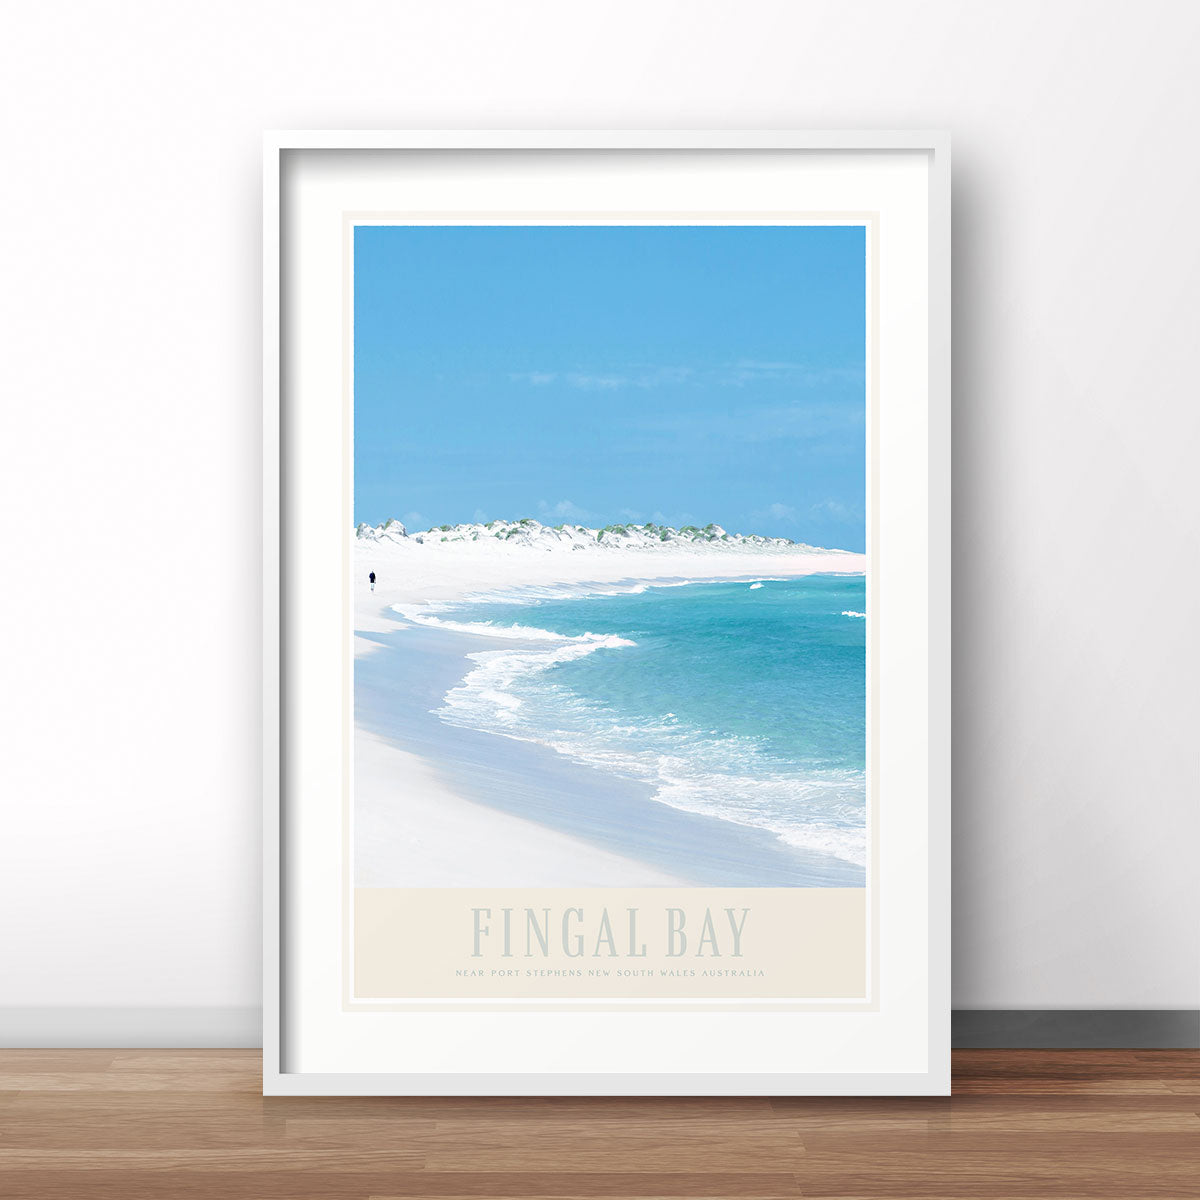 Fingal bay vintage retro poster print in white frame by places we luv